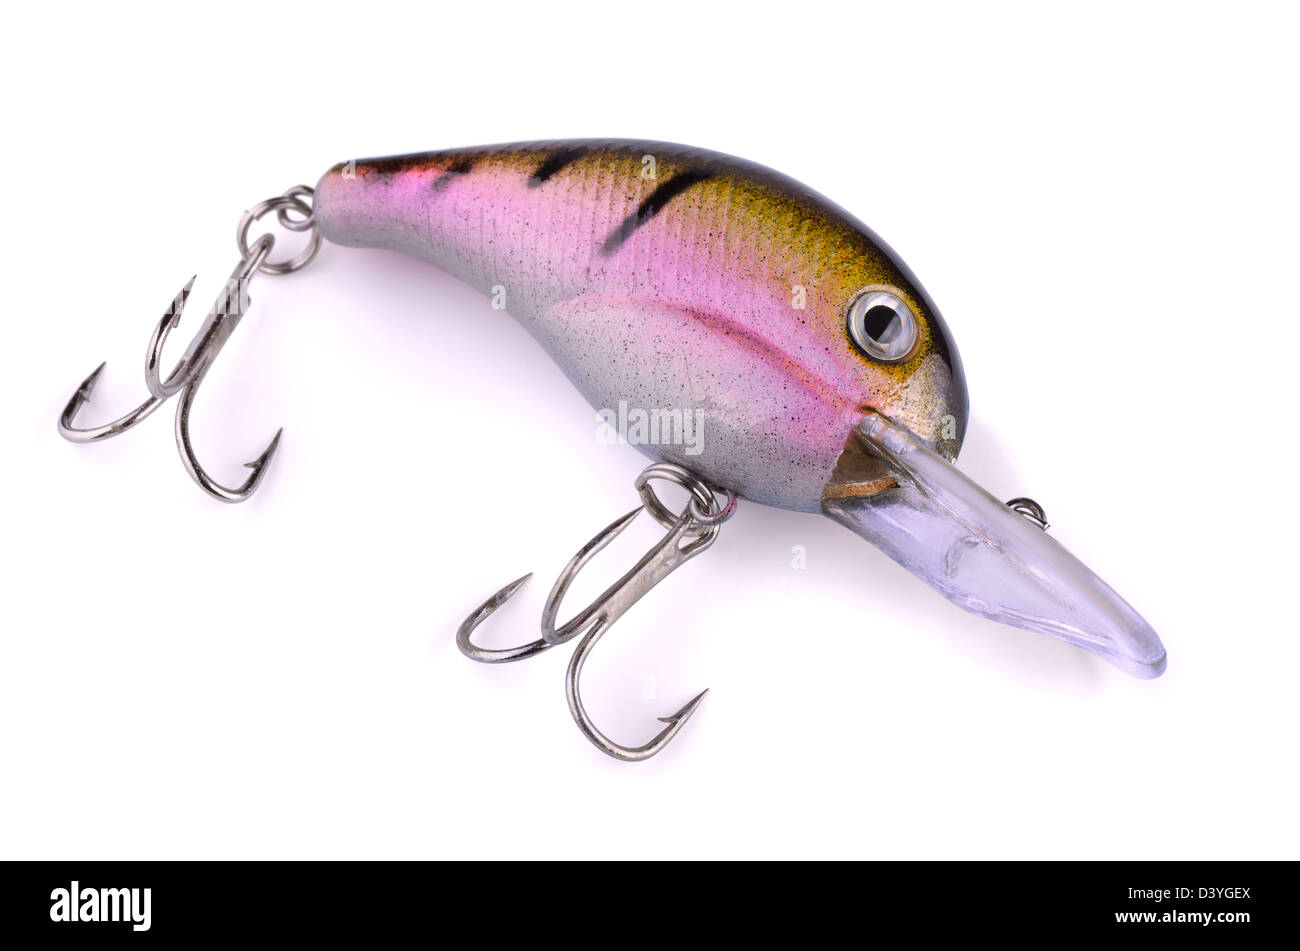 https://c8.alamy.com/comp/D3YGEX/topwater-fishing-lure-wobbler-isolated-on-white-D3YGEX.jpg